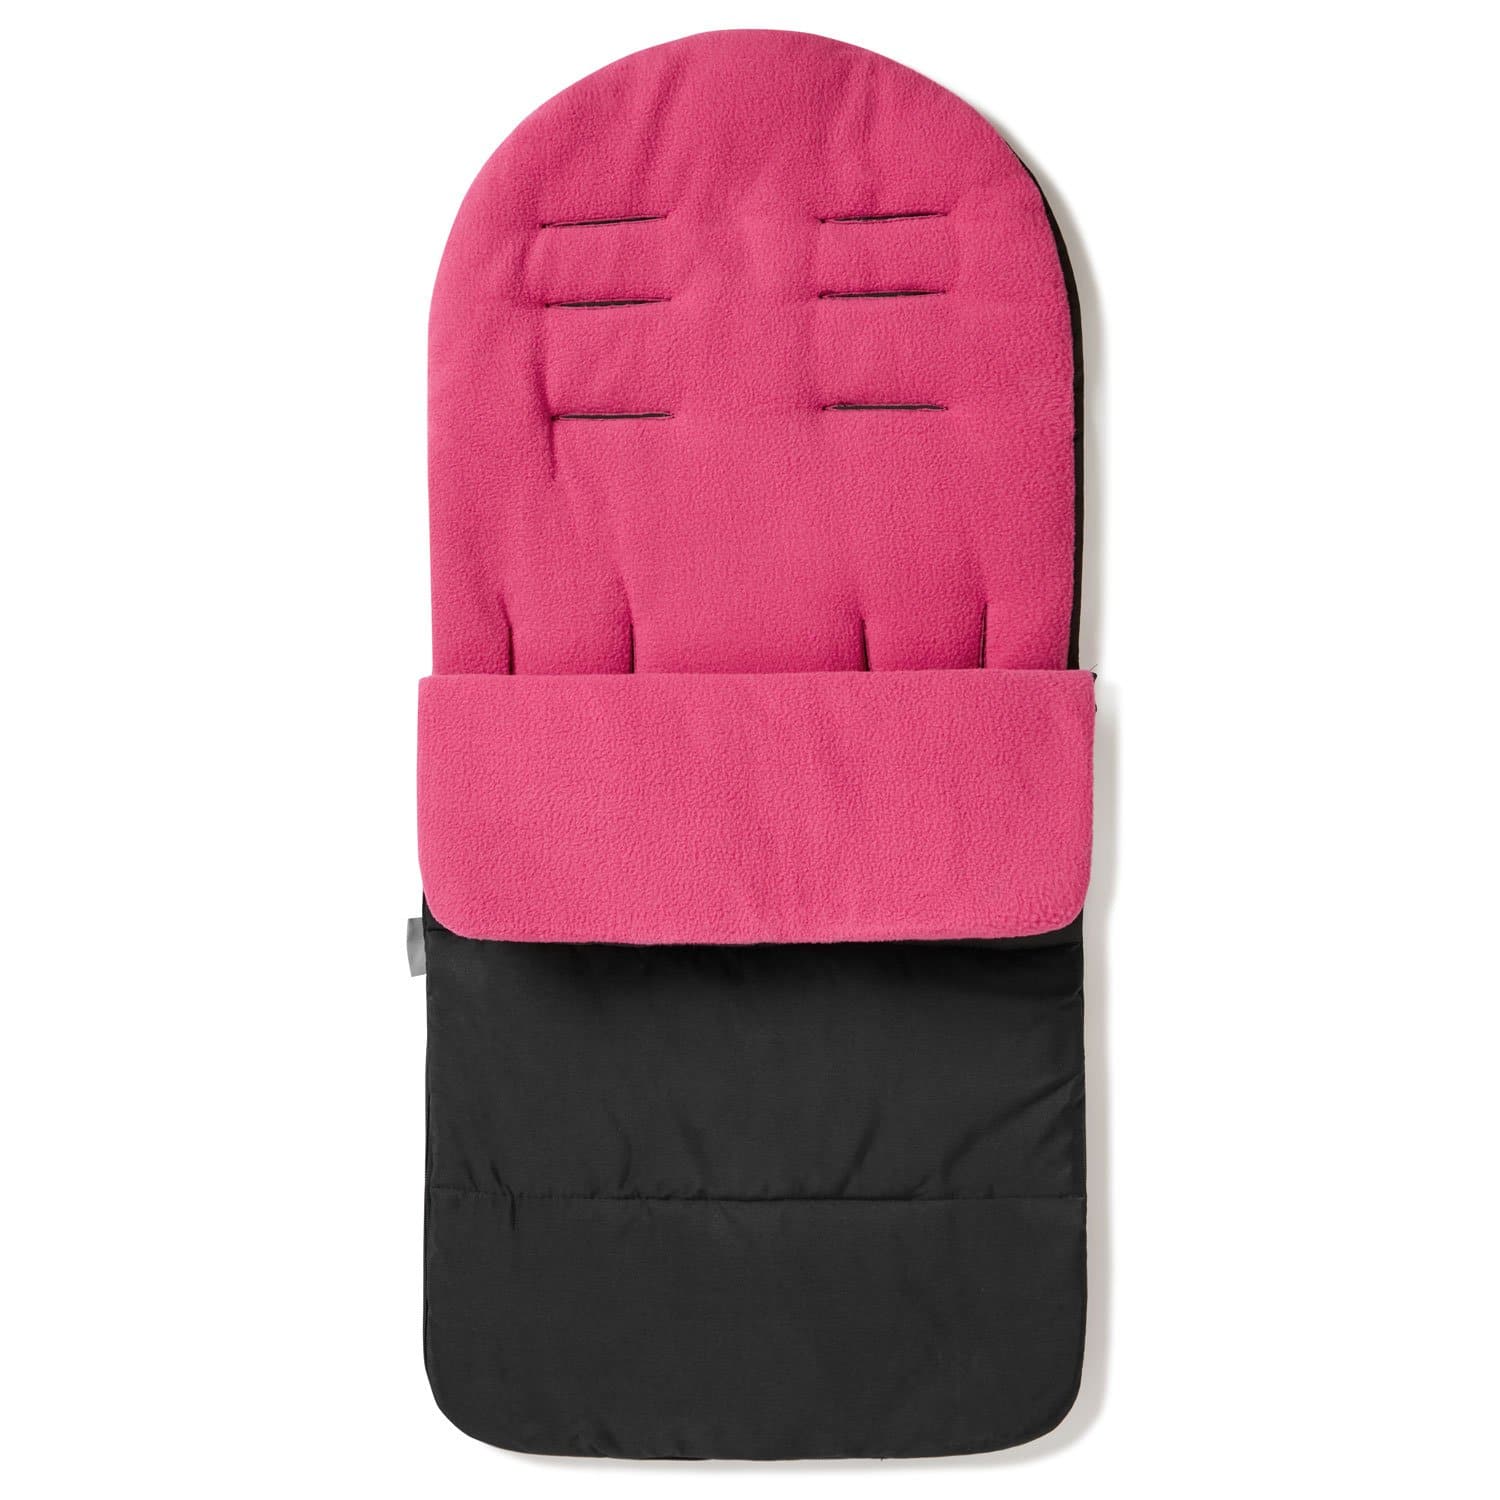 Premium Footmuff / Cosy Toes Compatible with Kiddy - Pink Rose / Fits All Models | For Your Little One